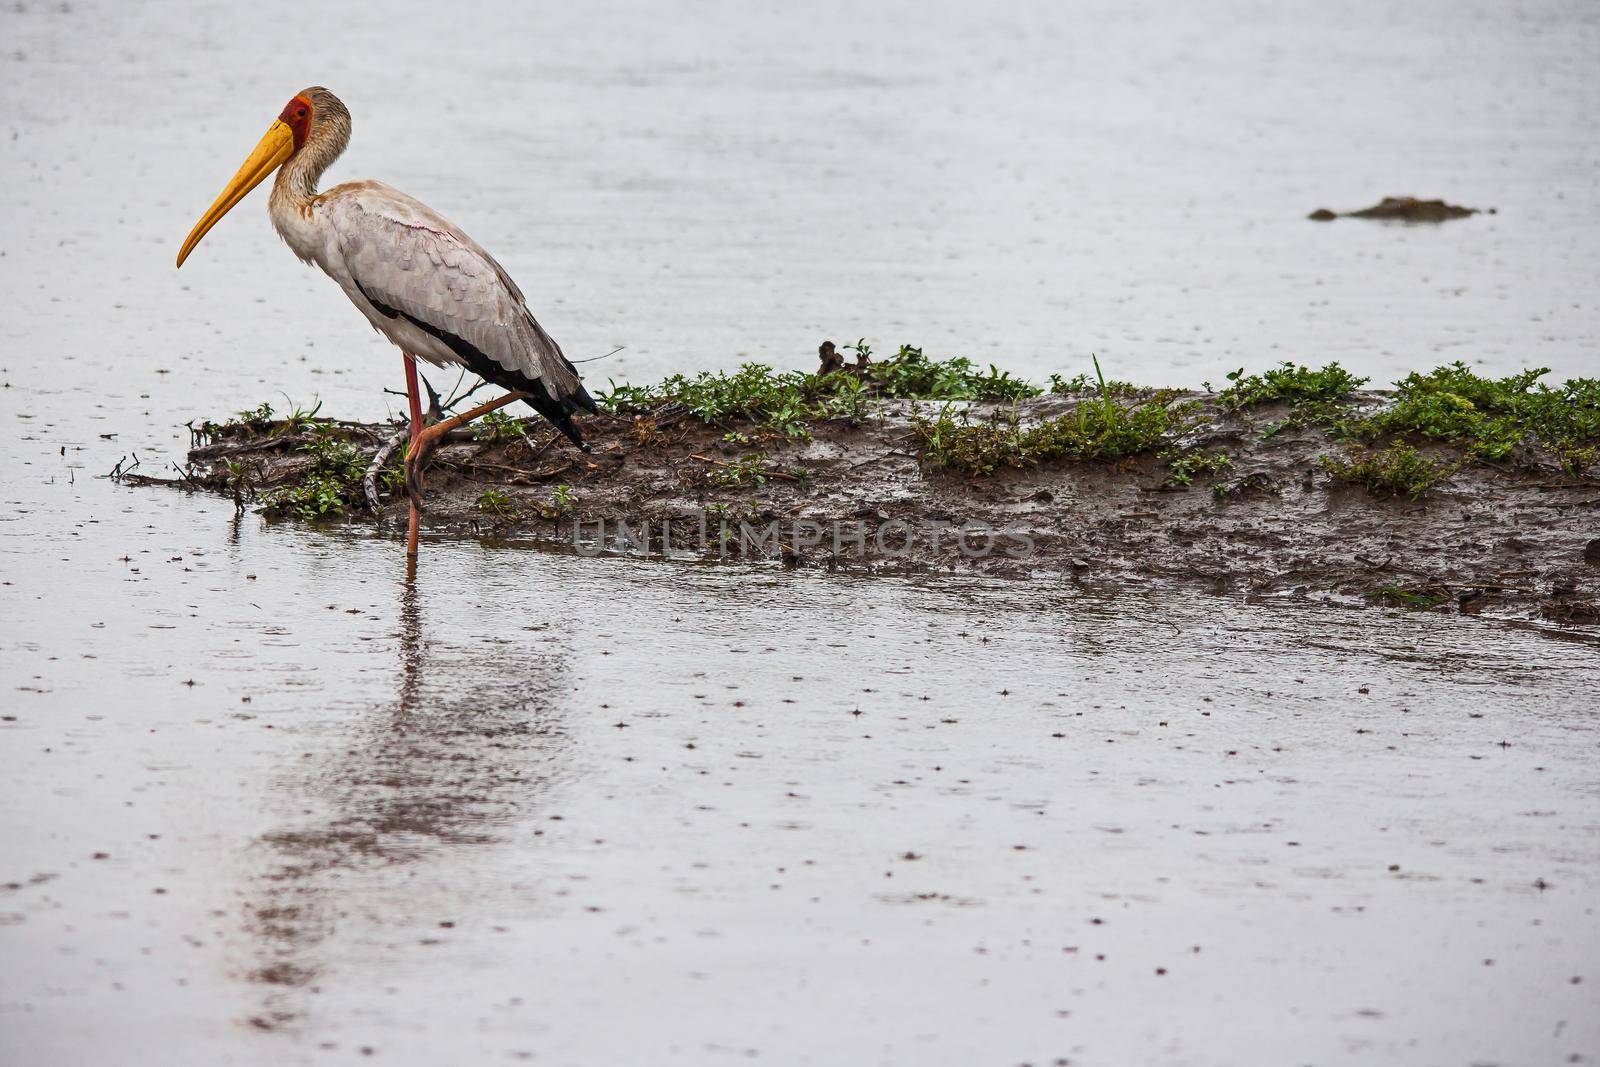 A lone Yellow-billed Stork (Mycteria ibis) hinting in the rain in Kruger National Park South Africa